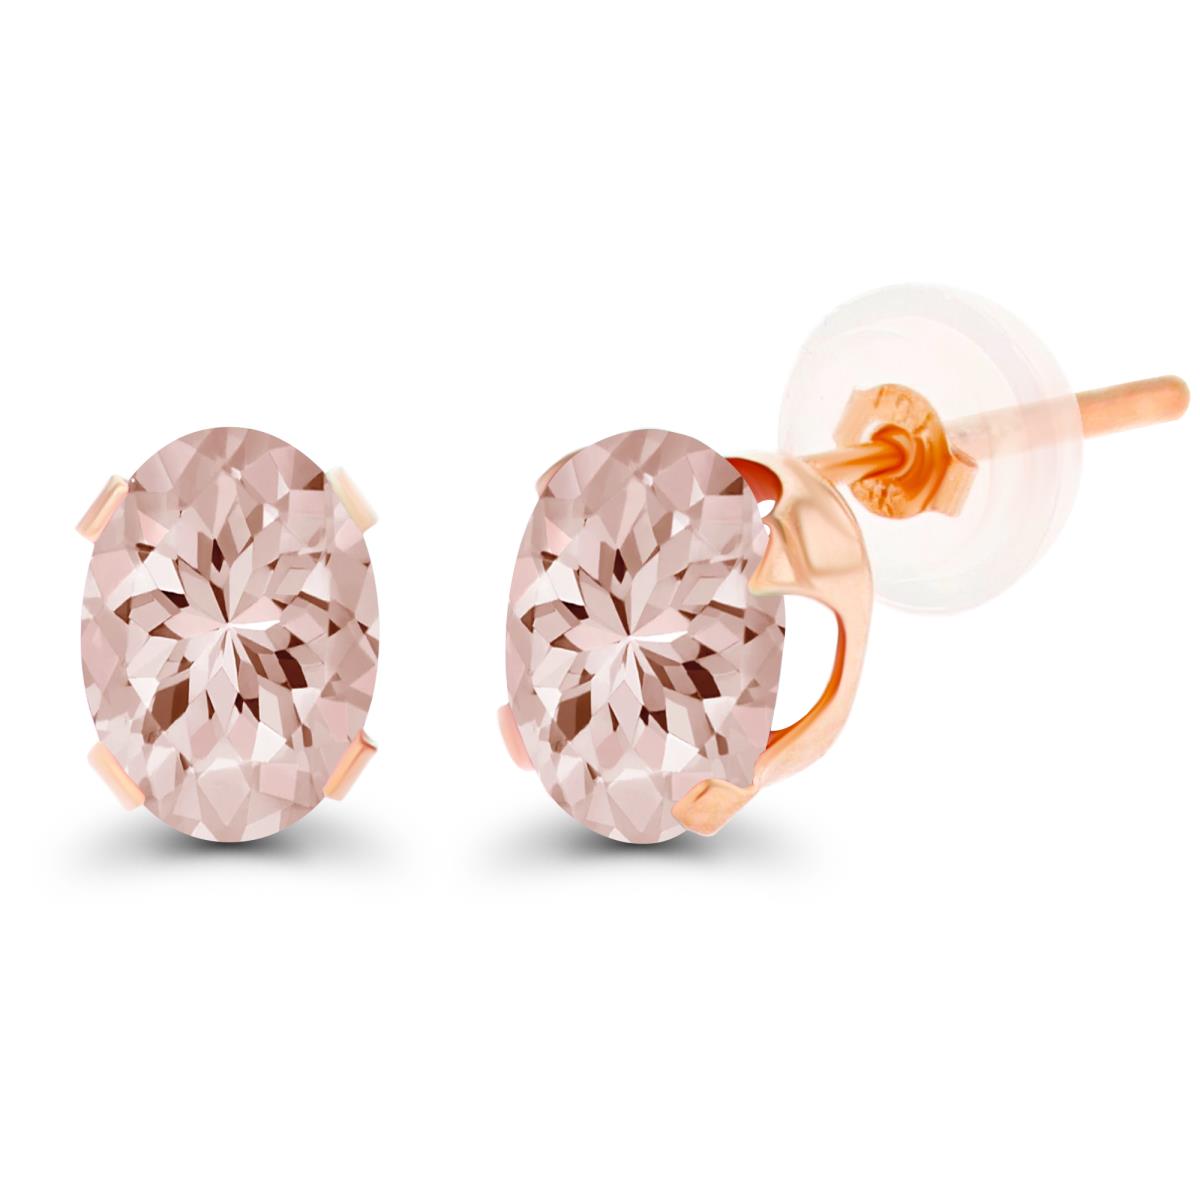 10K Rose Gold 7x5mm Oval Morganite Stud Earring with Silicone Back